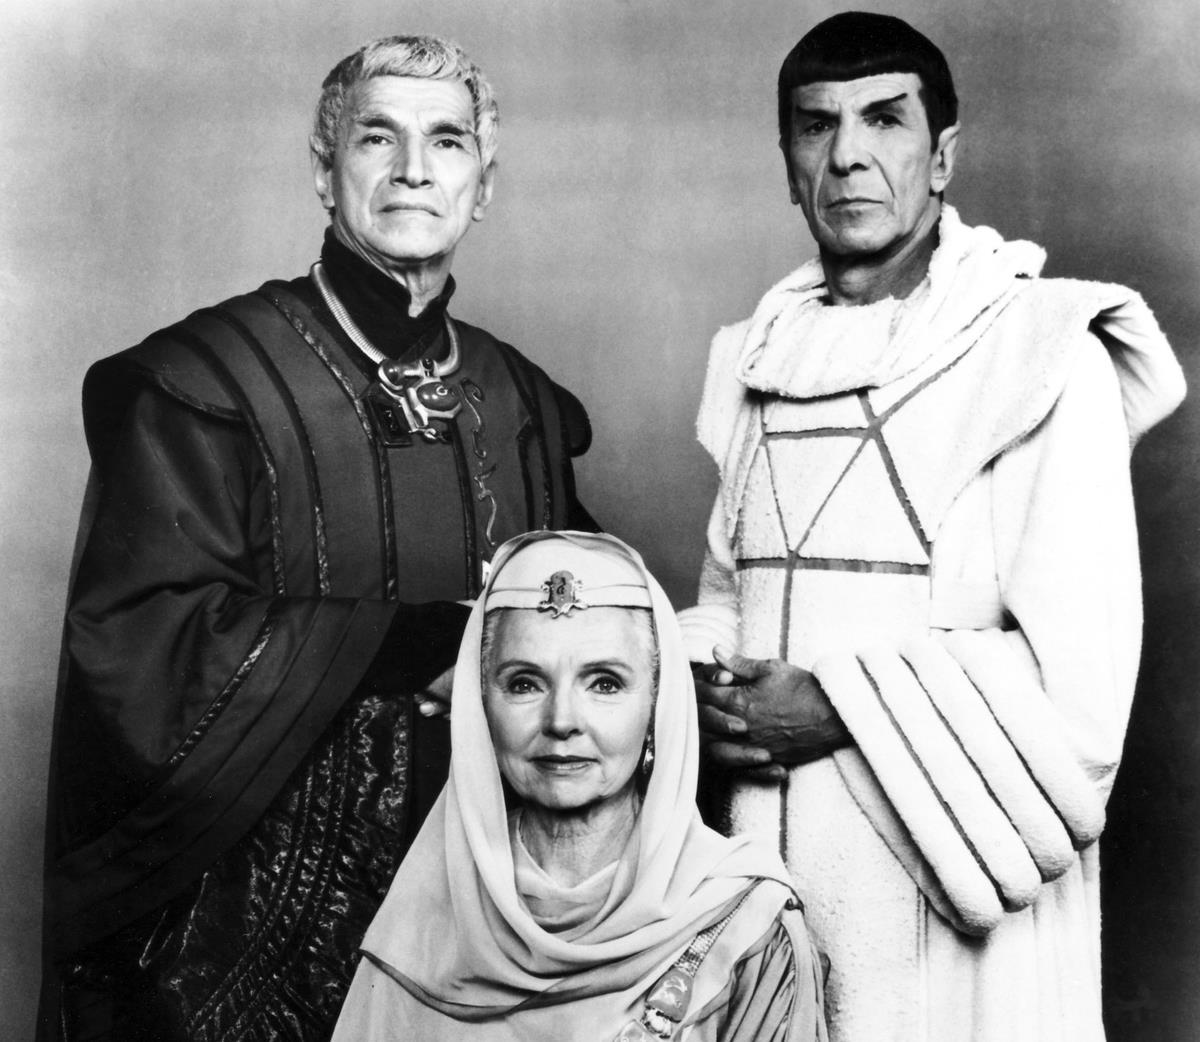 <p>Besides her role as Margaret, Jane Wyatt is popularly known for playing Amanda, Spock's mother on <i>Star Trek</i>. She appeared in the episode "Journey to Babel" and later in the 1986 film, <i>Star Trek VI: The Voyage Home</i>. However, some fans don't know that Elinor Donahue, who played Betty, also appeared on <i>Star Trek</i>. </p> <p>On the episode "Metamorphosis," Donahue played the role of Commissioner Nancy Hedford, who embodies the entity called "The Companion." Jane Wyatt appeared on the very next aired episode. While the actresses weren't in the same episode, they debuted on the same show back-to-back.</p>